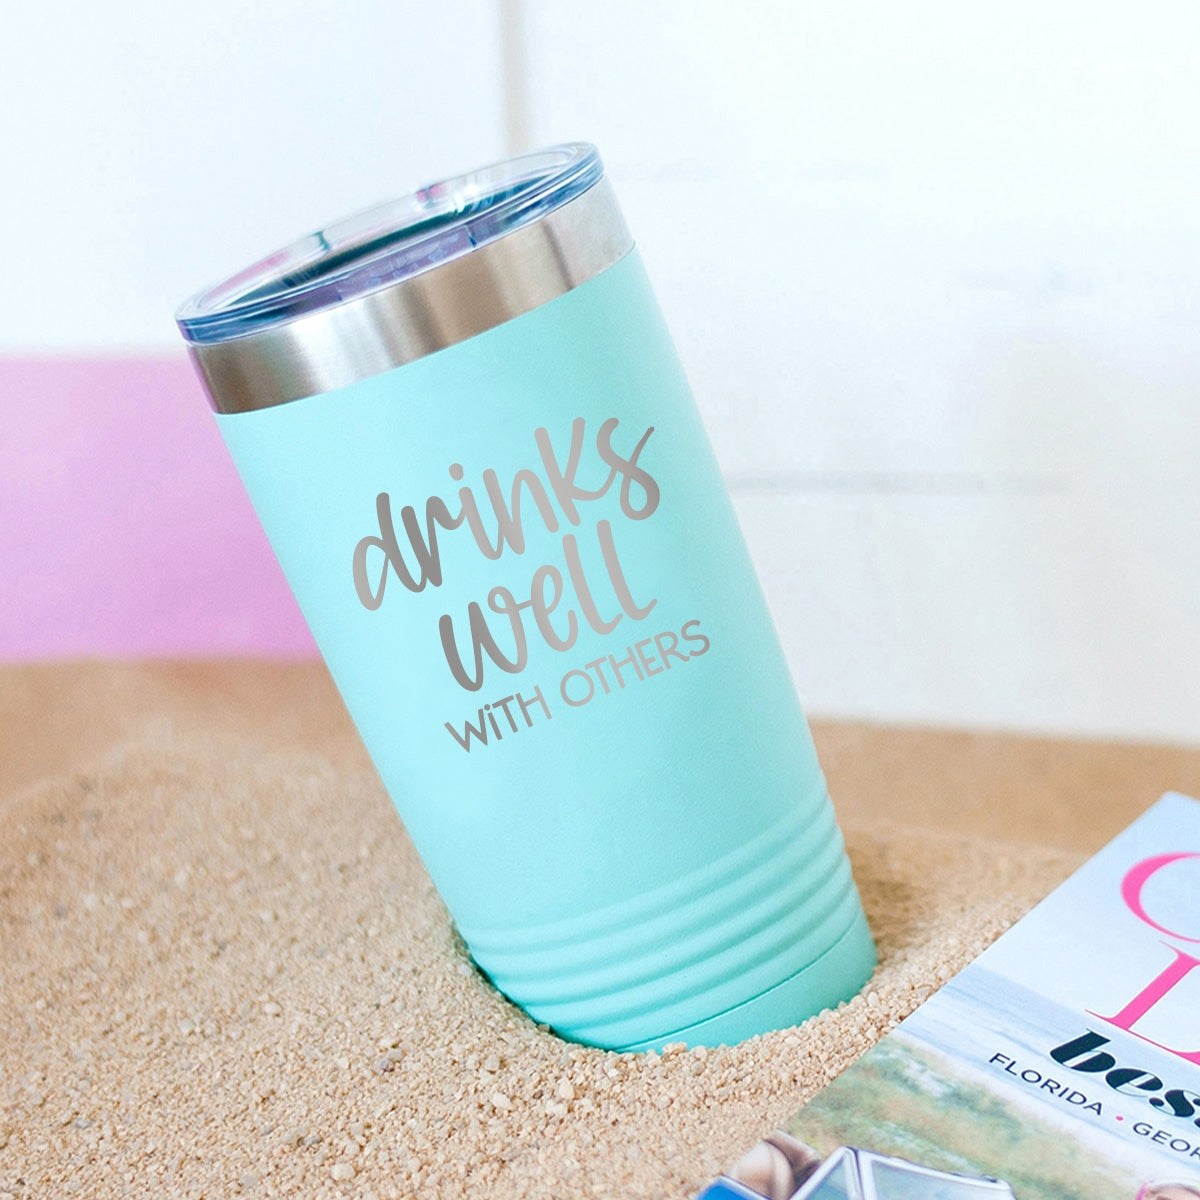 Drinks Well With Others Teal 20oz Insulated Tumbler